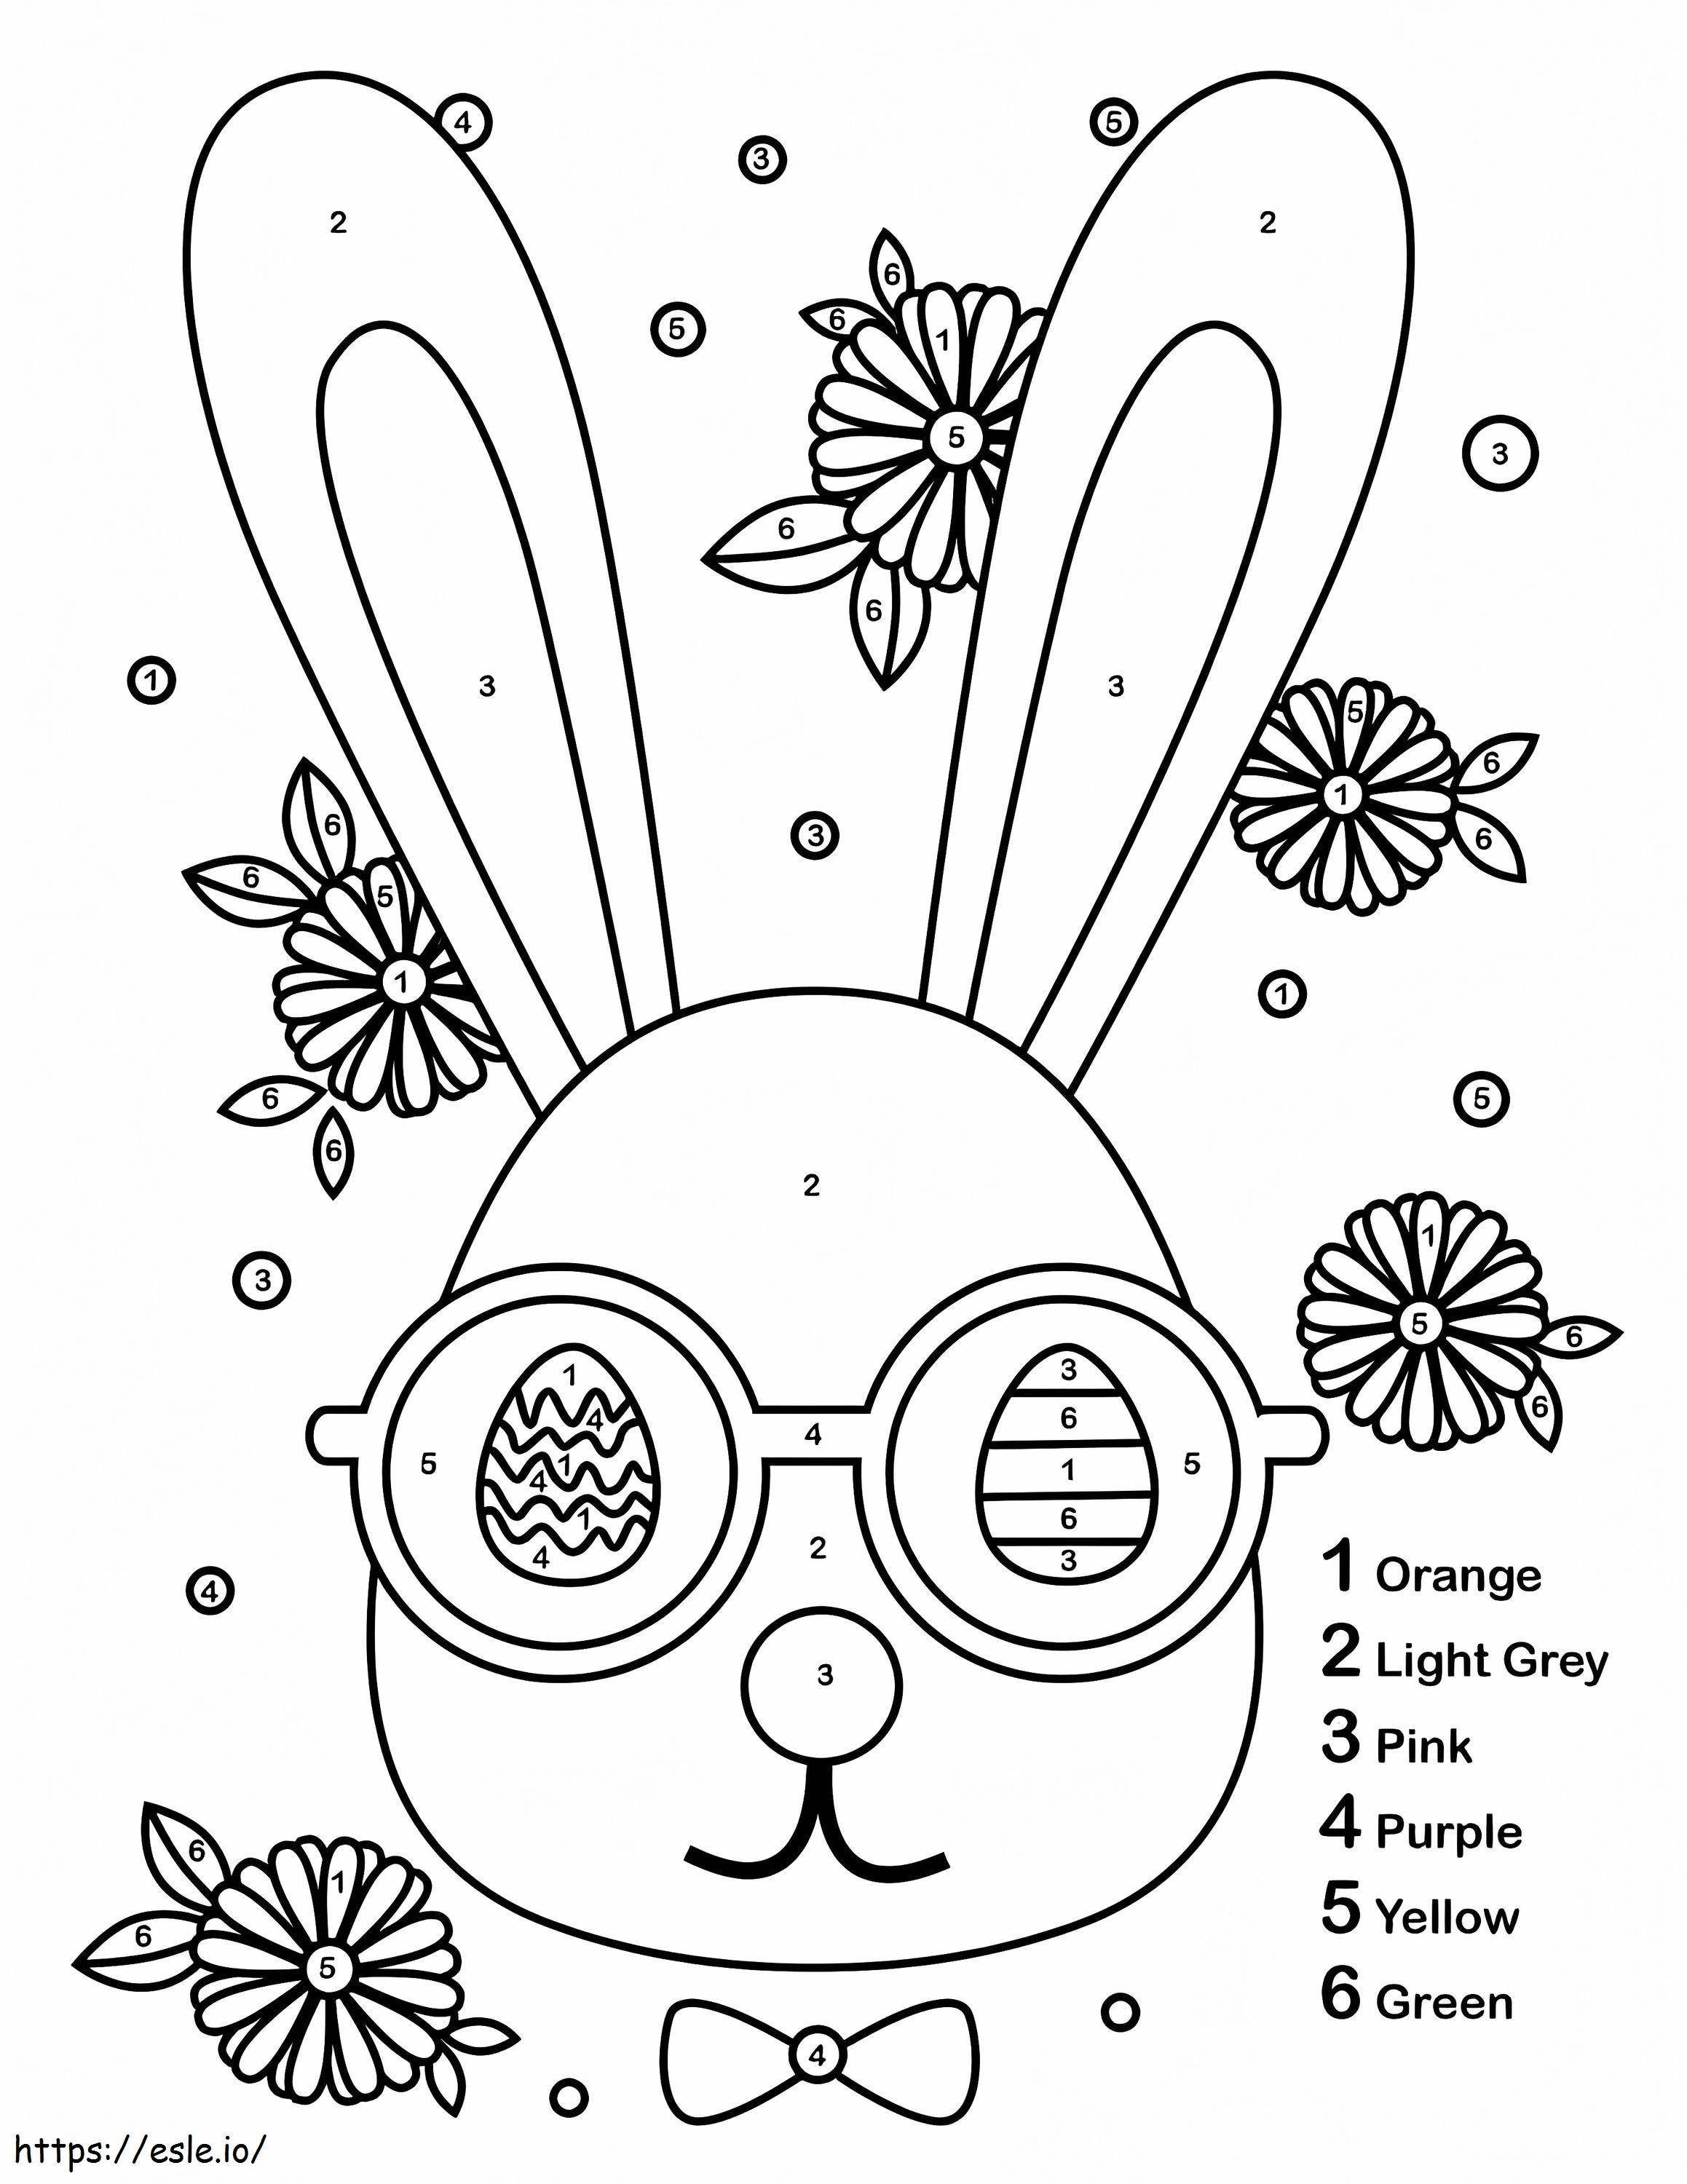 Easter Bunny Color By Number coloring page